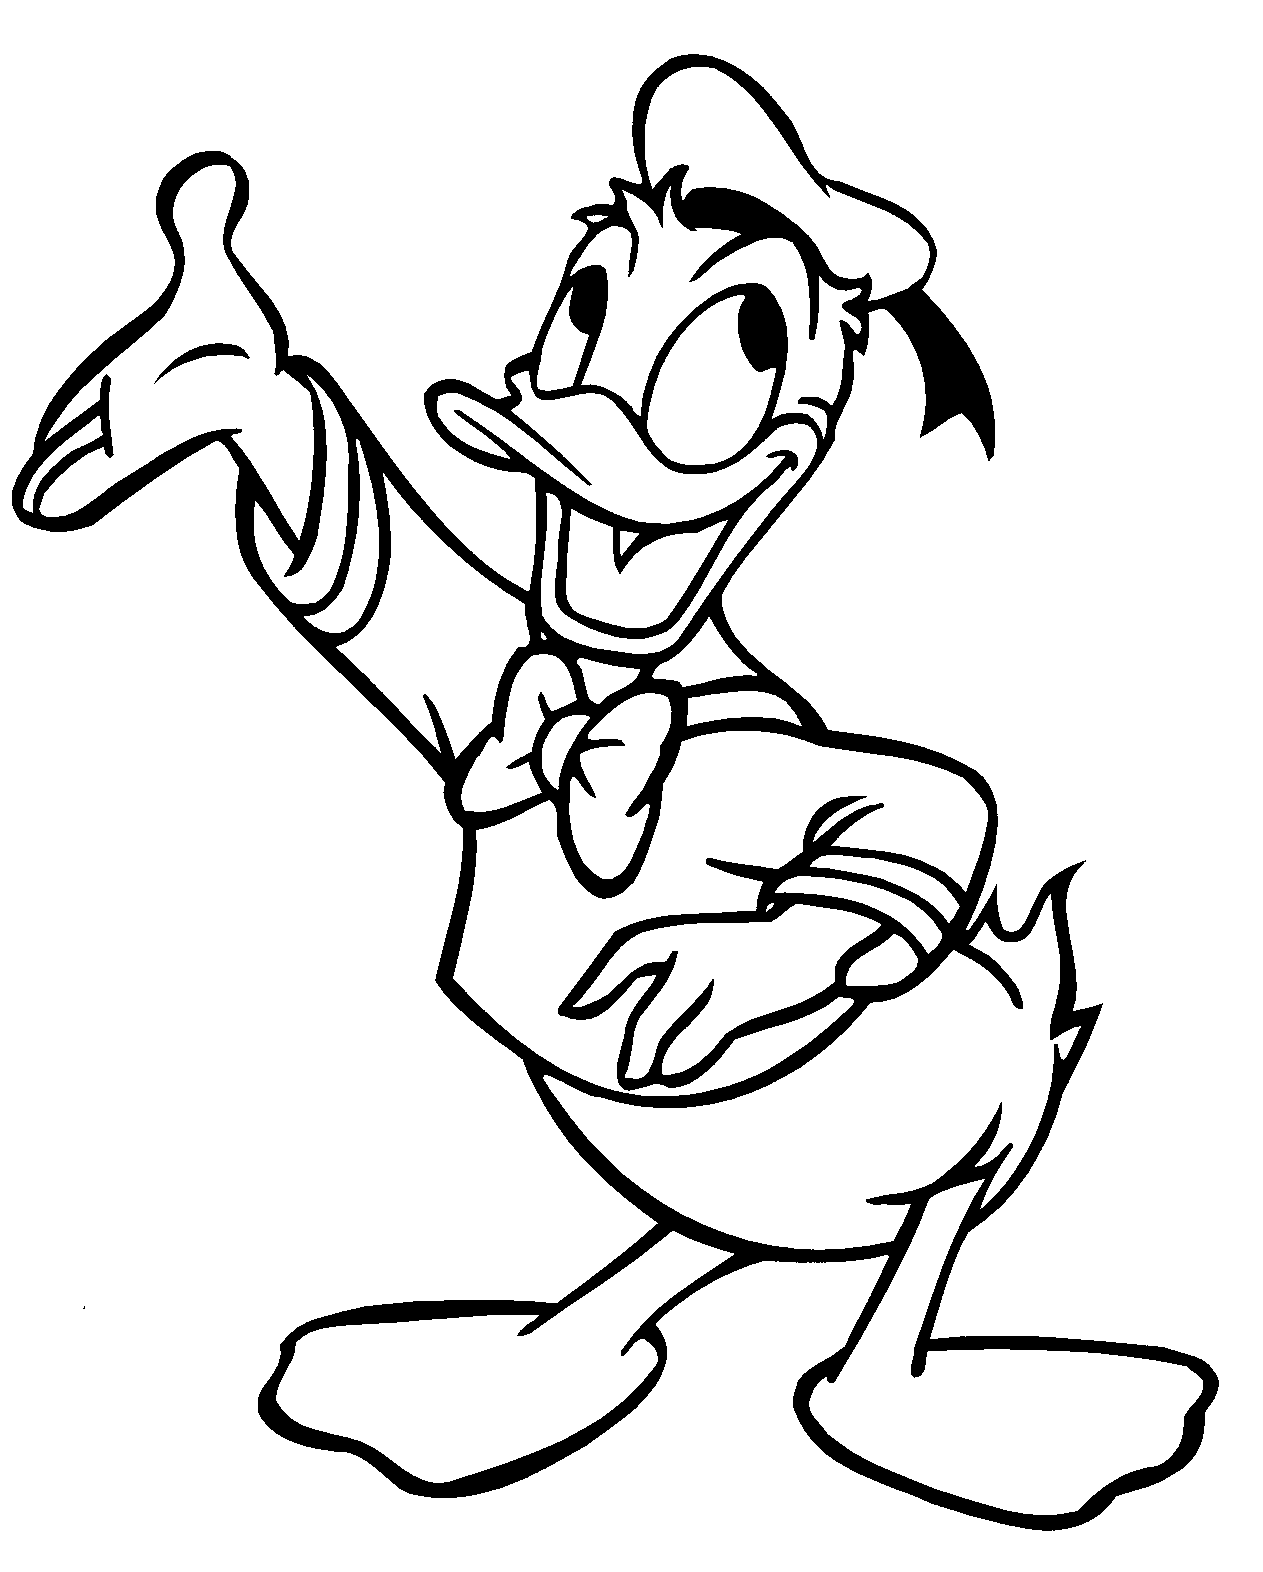 donald duck images for colouring donald duck coloring pages disneyclipscom duck for images donald colouring 